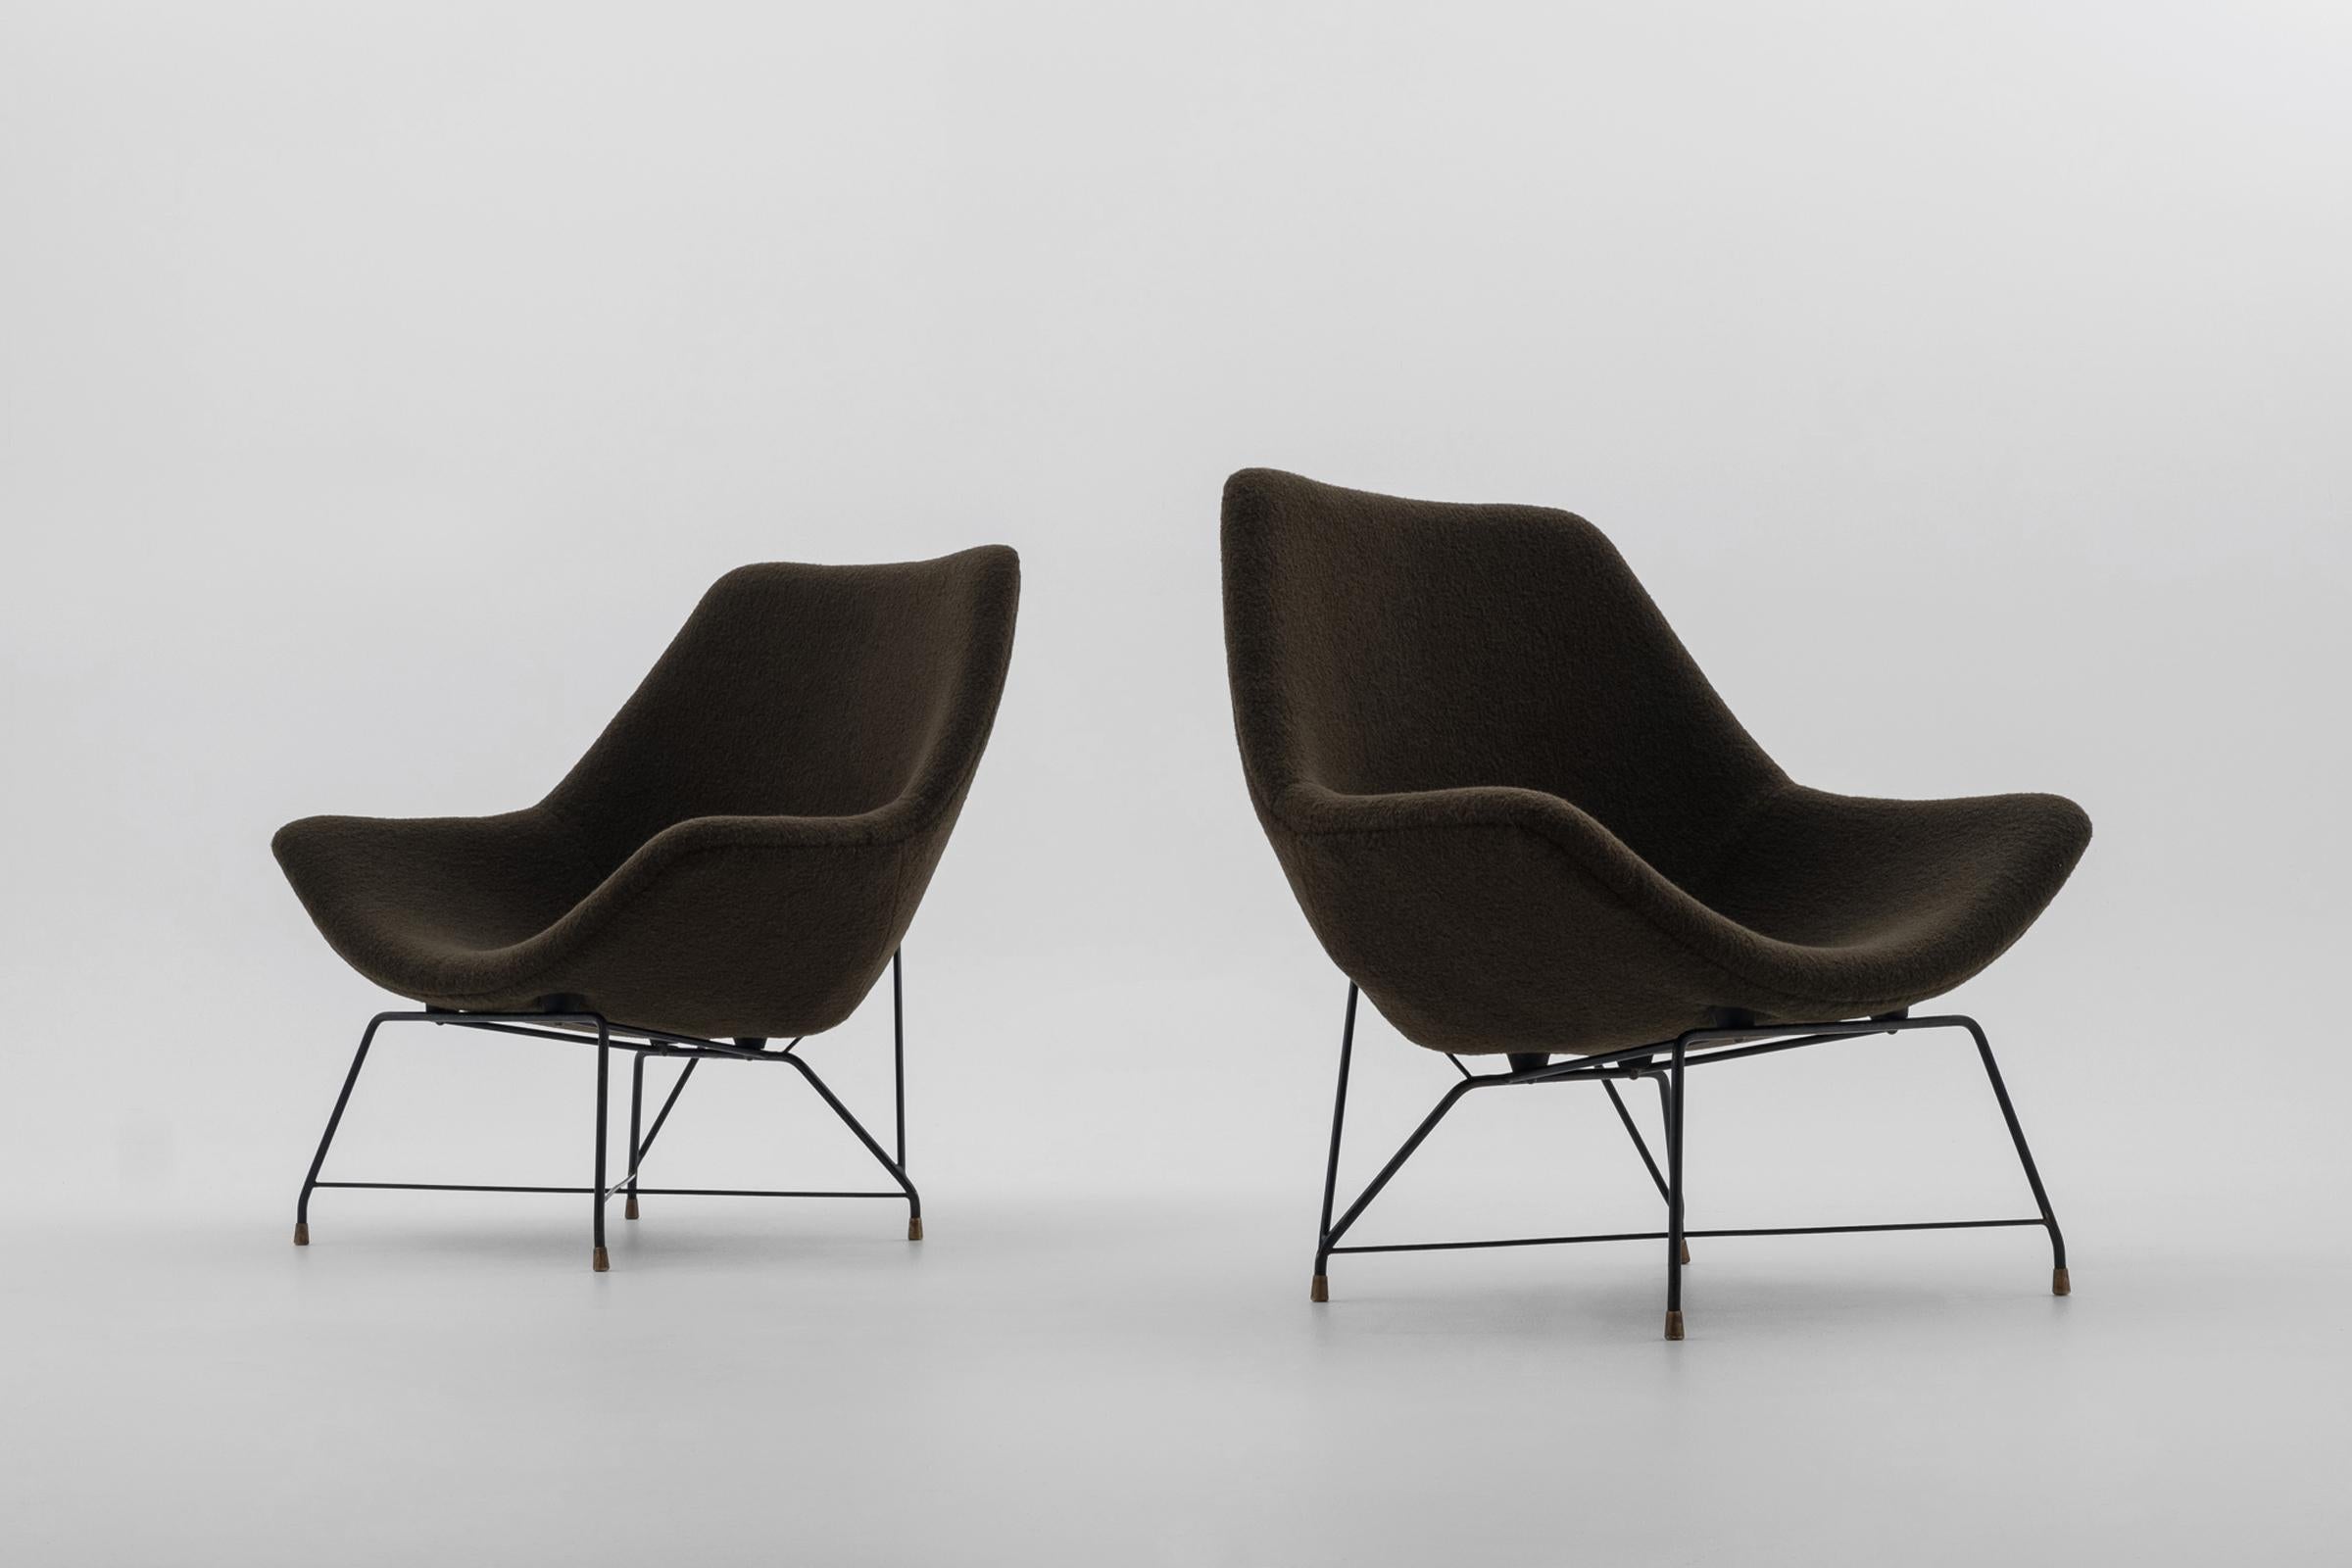 Wonderful pair of Kosmos lounge chairs by Augusto Bozzi for Saporiti, Italy 1956. Minimal black wire frames with chic brass details. The chairs are reupholstered in a high quality dark green woolen bouclette by Élitis. Highly comfortable.
In an